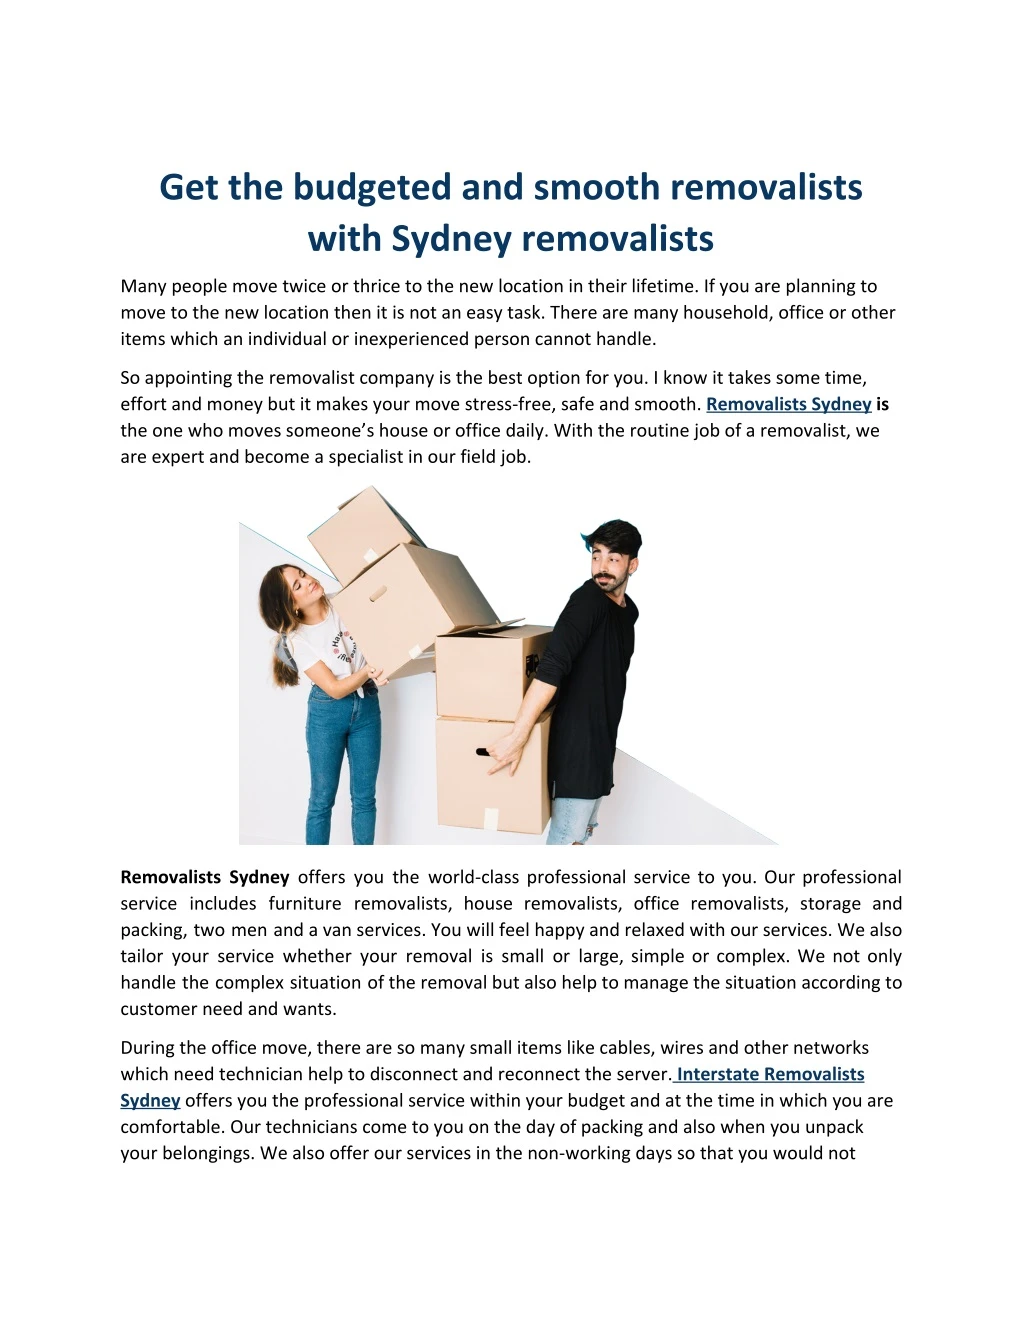 get the budgeted and smooth removalists with